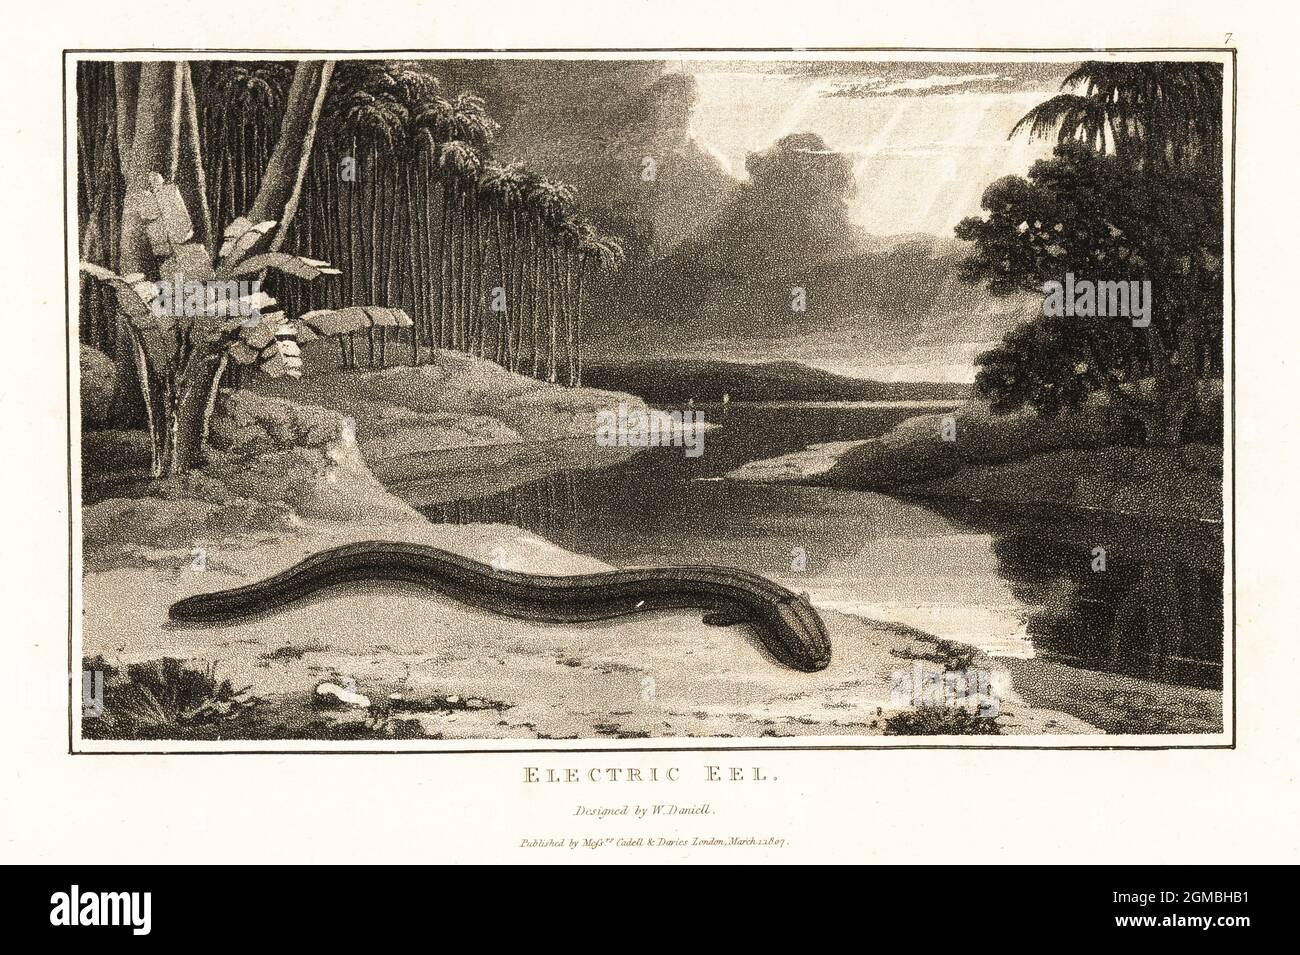 Electric eel, Electrophorus electricus, on the shore near a river in the South American jungle. Electric gymnote, Gymnotus electricus, Aquatint drawn and engraved by William Daniell from William Wood’s Zoography, Cadell and Davies, 1807. Stock Photo